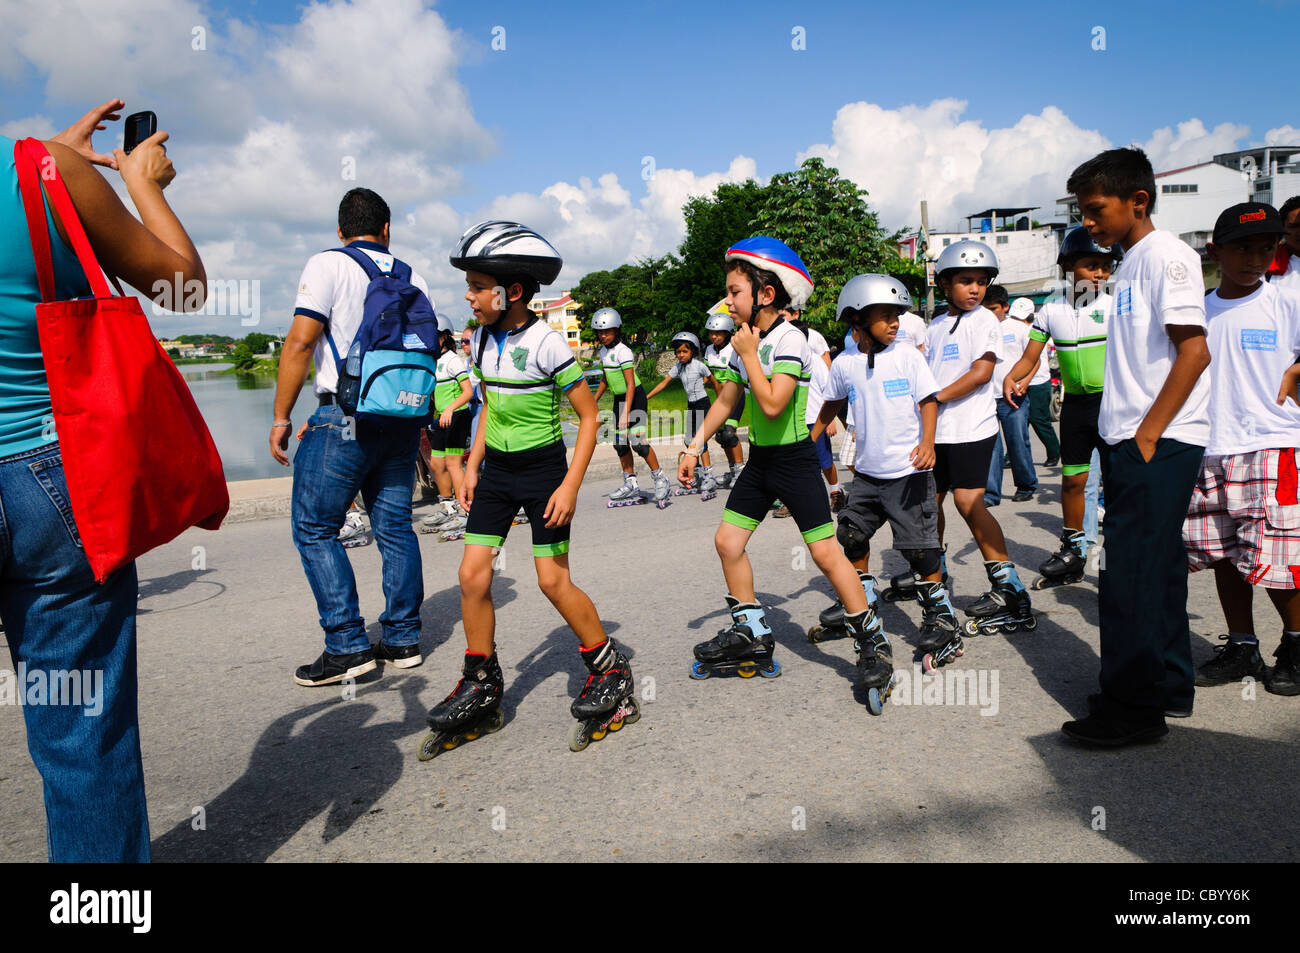 FLORES, Guatemala - A group of boys on rollerblades participate in the Guatemalan Independence Day procession on 15 September 2011. Groups of school students parade in a procession through the streets of Flores, starting in the Parque Central, walking through the town, and crossing the causeway into Santa Elena. Stock Photo